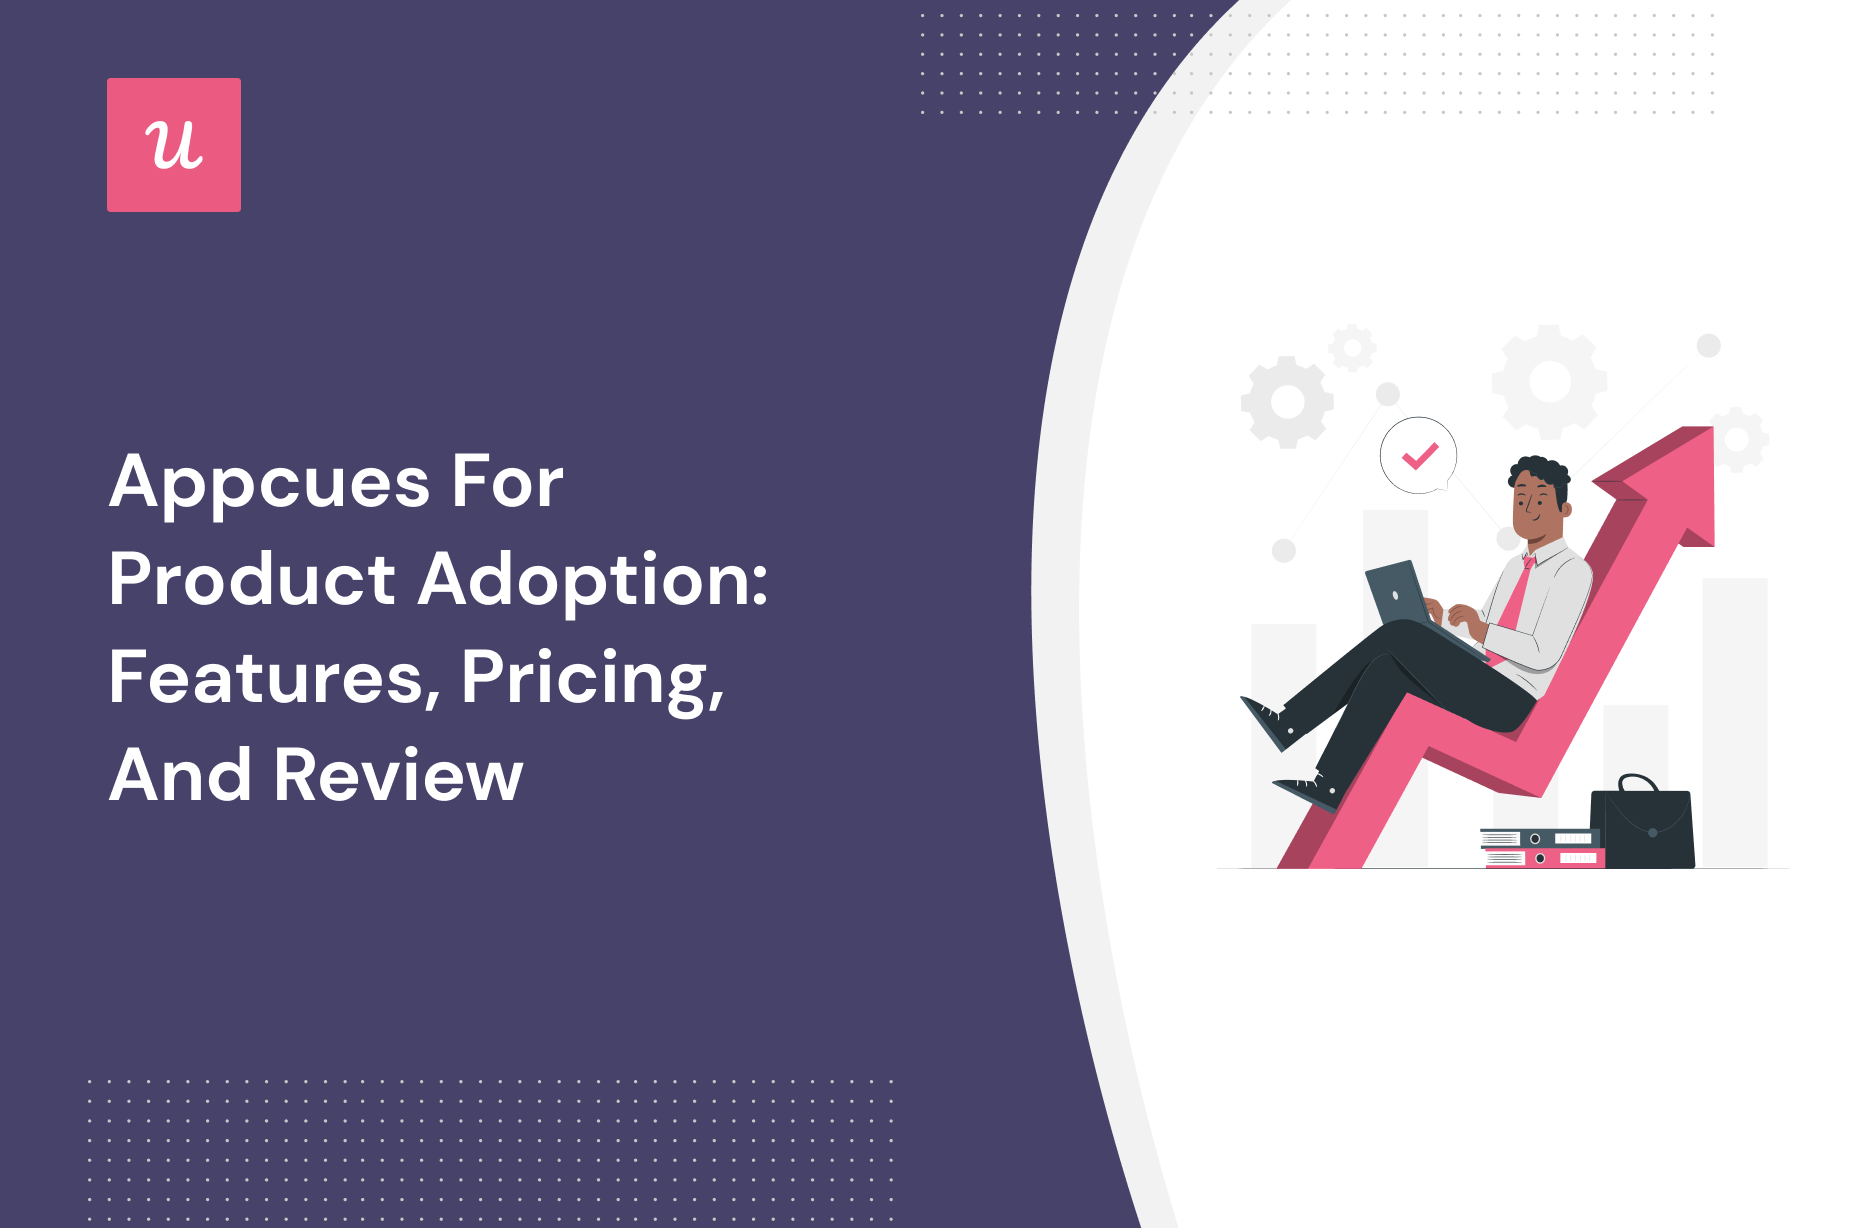 Appcues for Product adoption: Features, Pricing, and Review